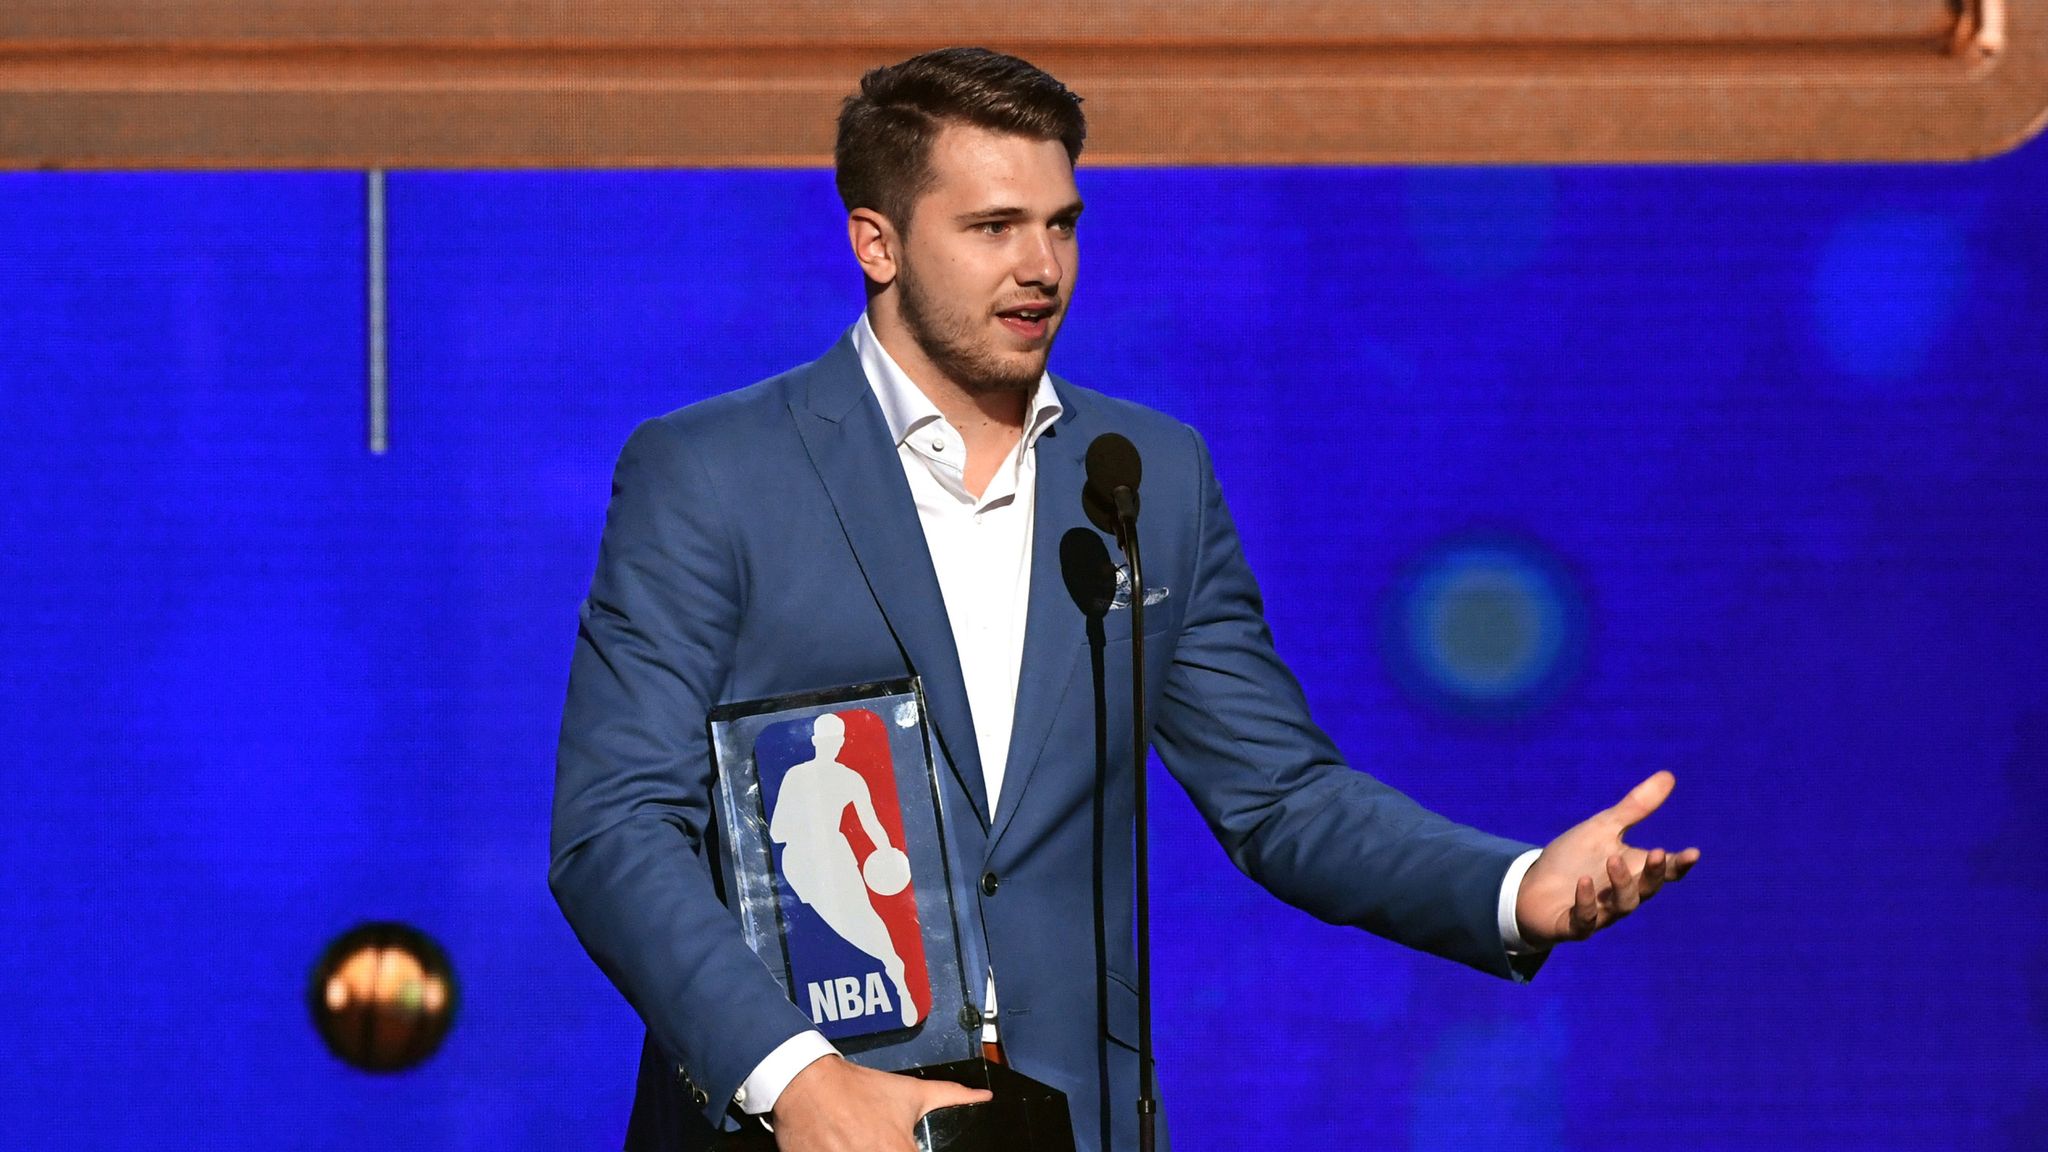 The NBA Awards show scores a win for the league — and for fashion